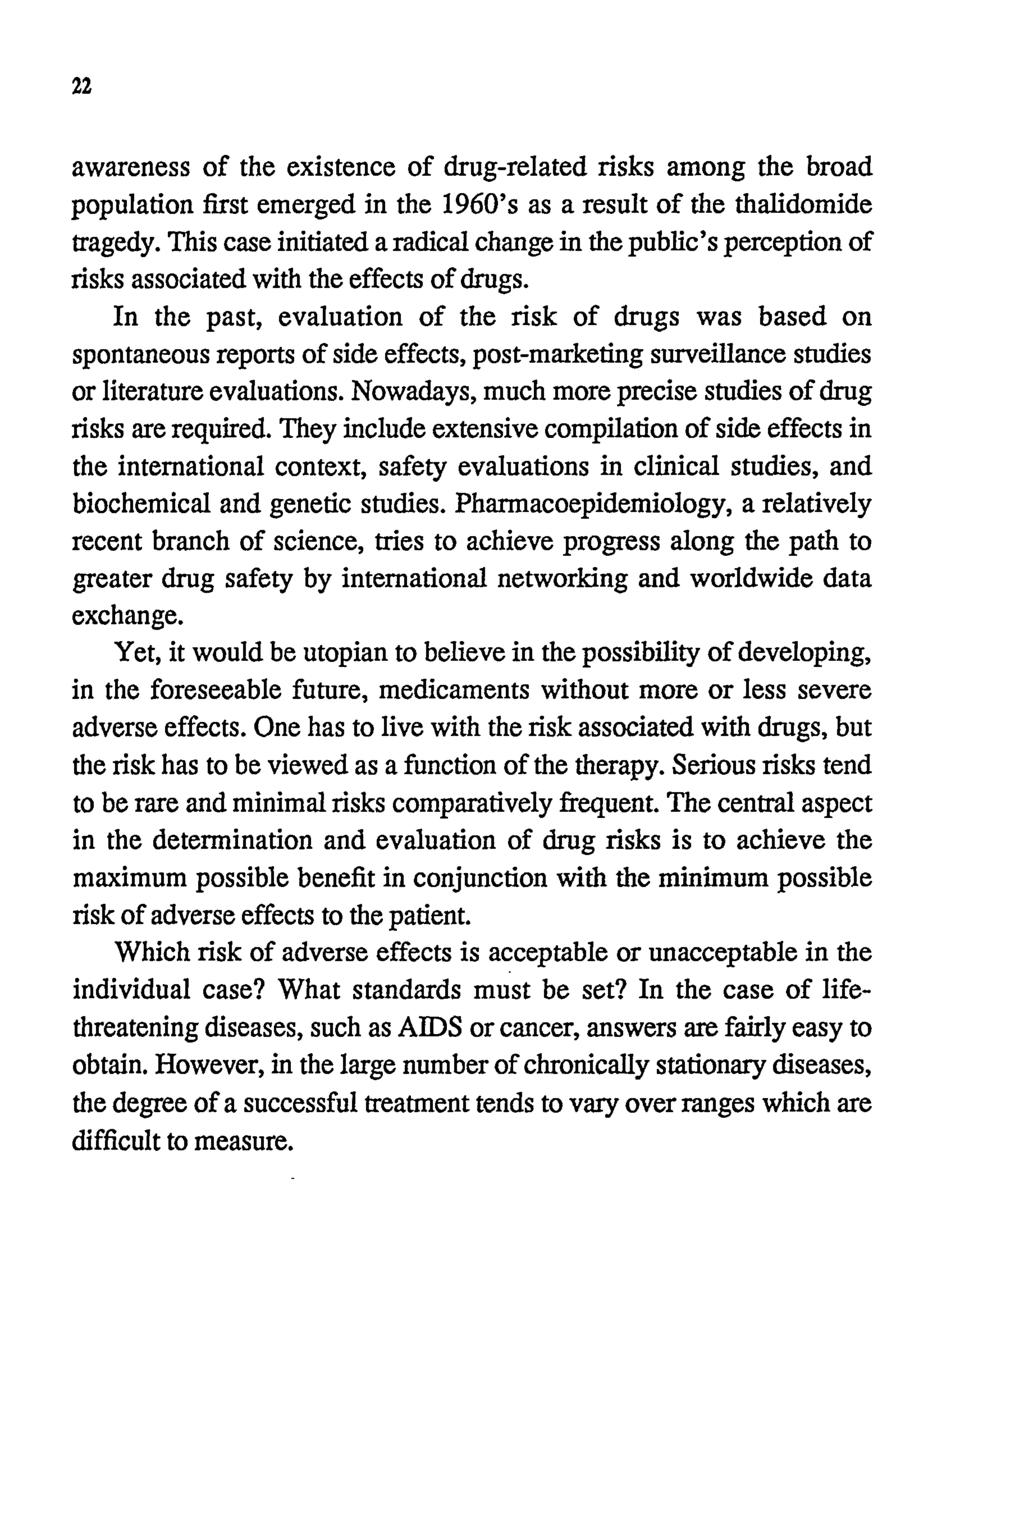 awareness of the existence of drug-related risks among the broad population first emerged in the 1960's as a result of the thalidomide tragedy.